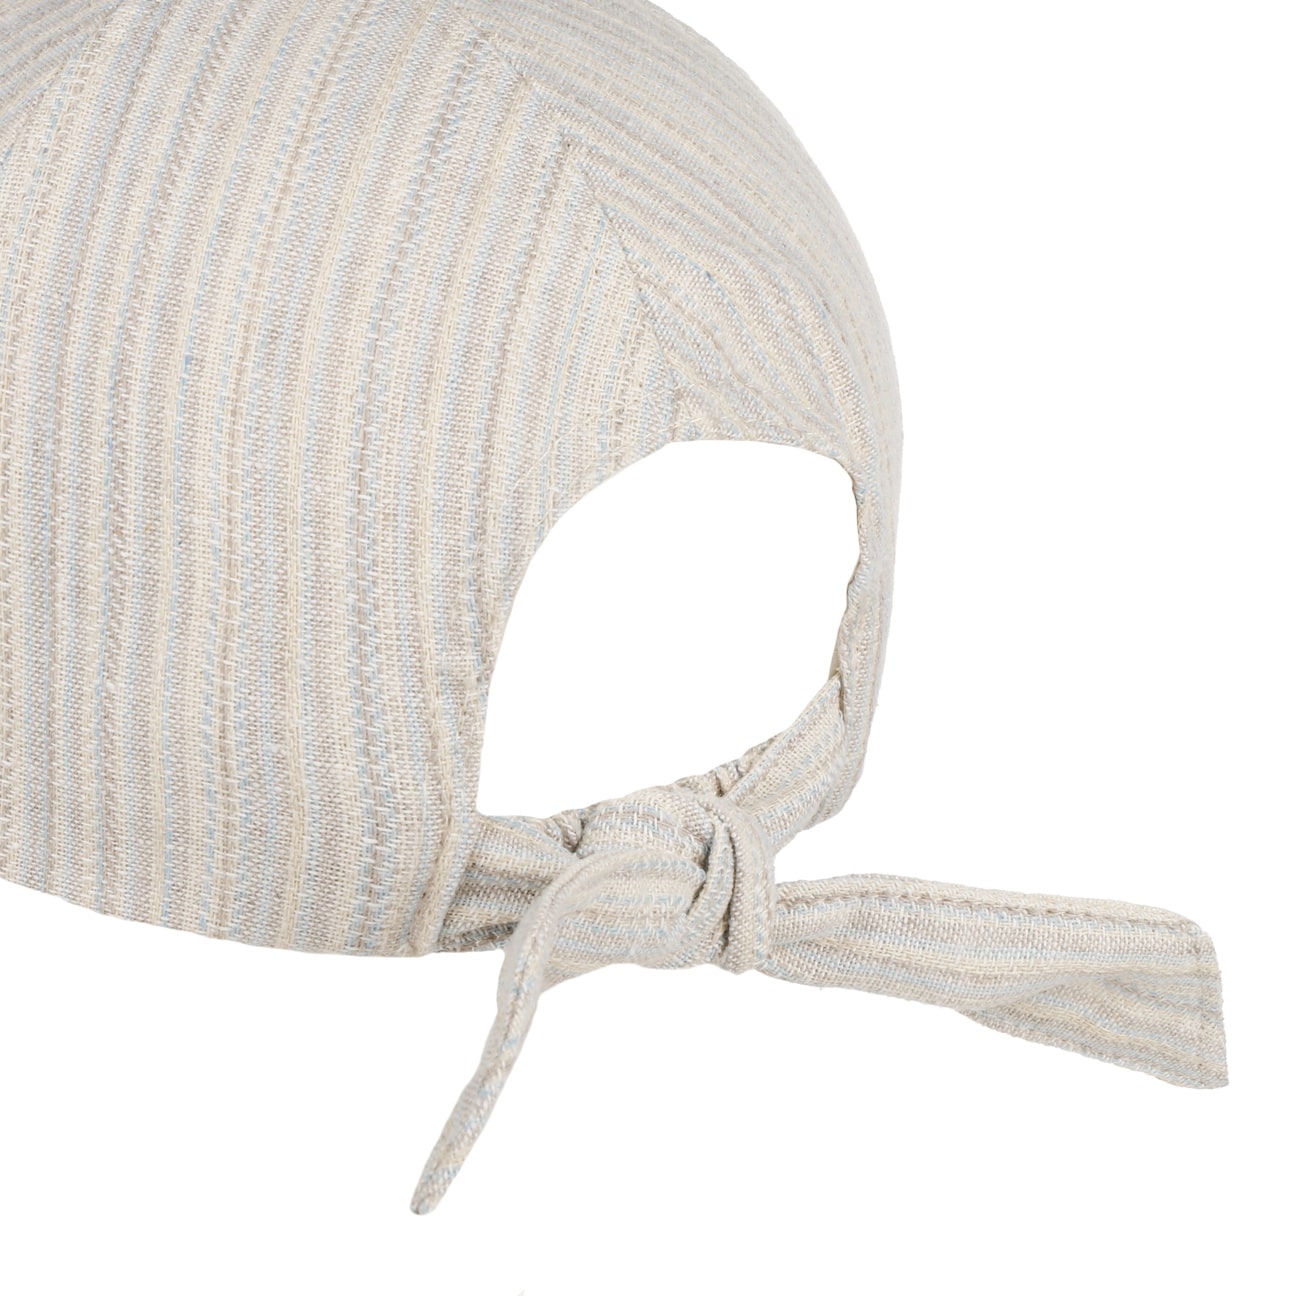 Fine Stripes Sommercap by Seeberger | 39,95 €